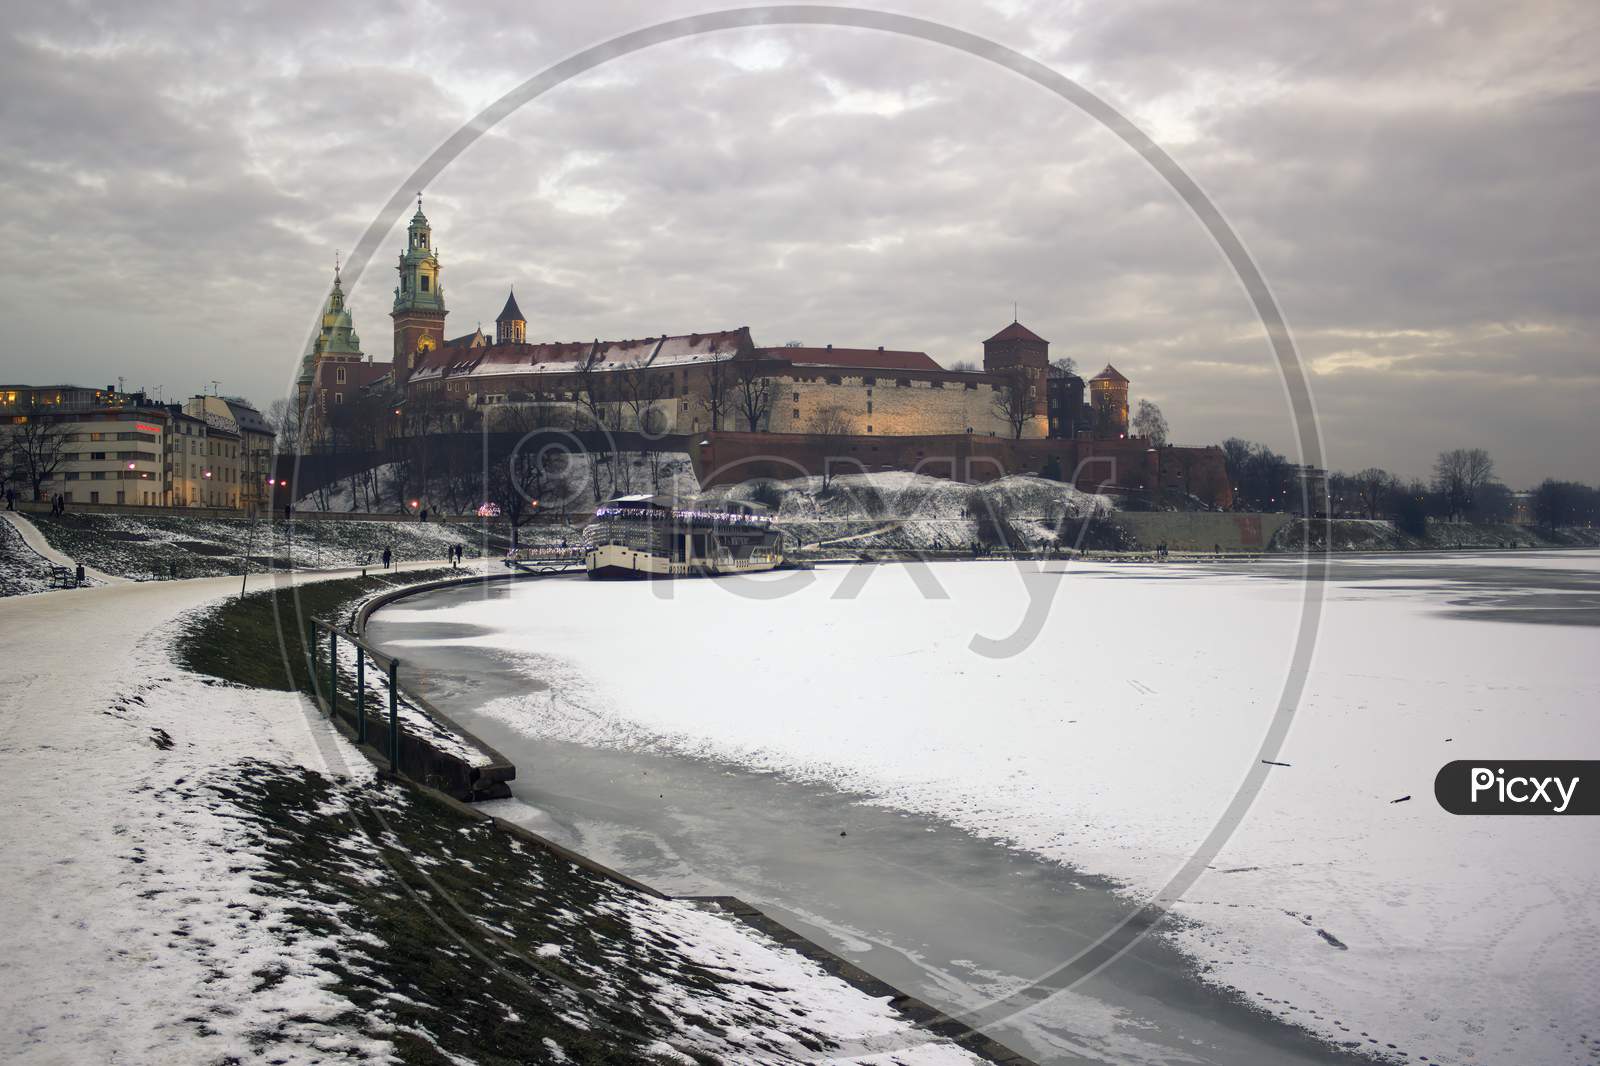 Krakow, Poland - January 09, 2016: Wide Angle View Of Famous Wawel Castle Covered With Snow Next To Vistual River Against Dramatic Clouds